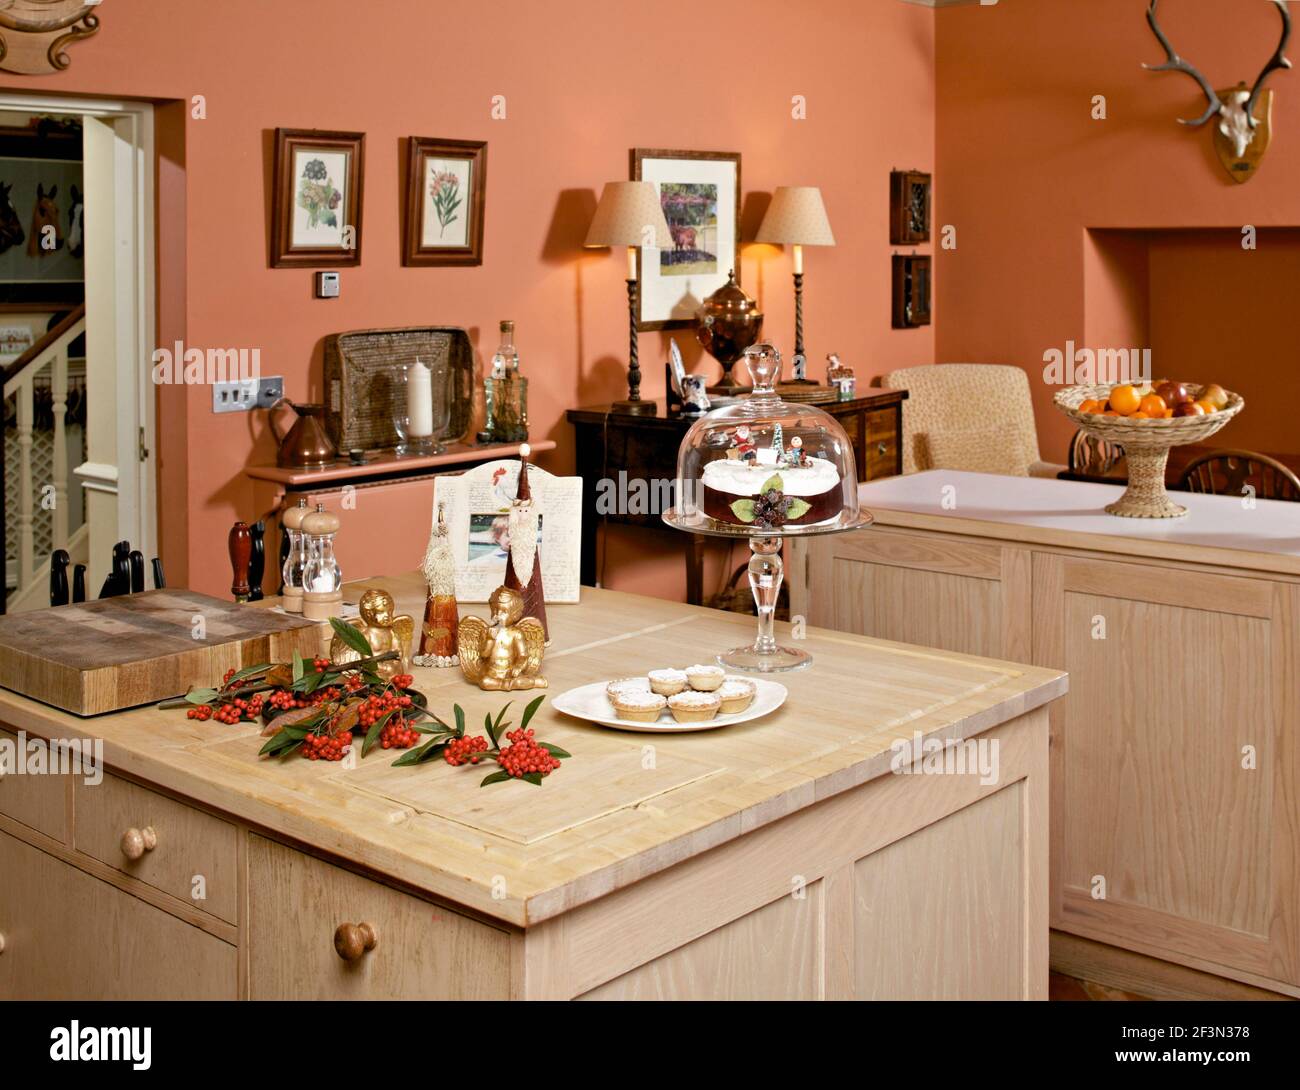 Terracotta kitchen with light wood units Stock Photo